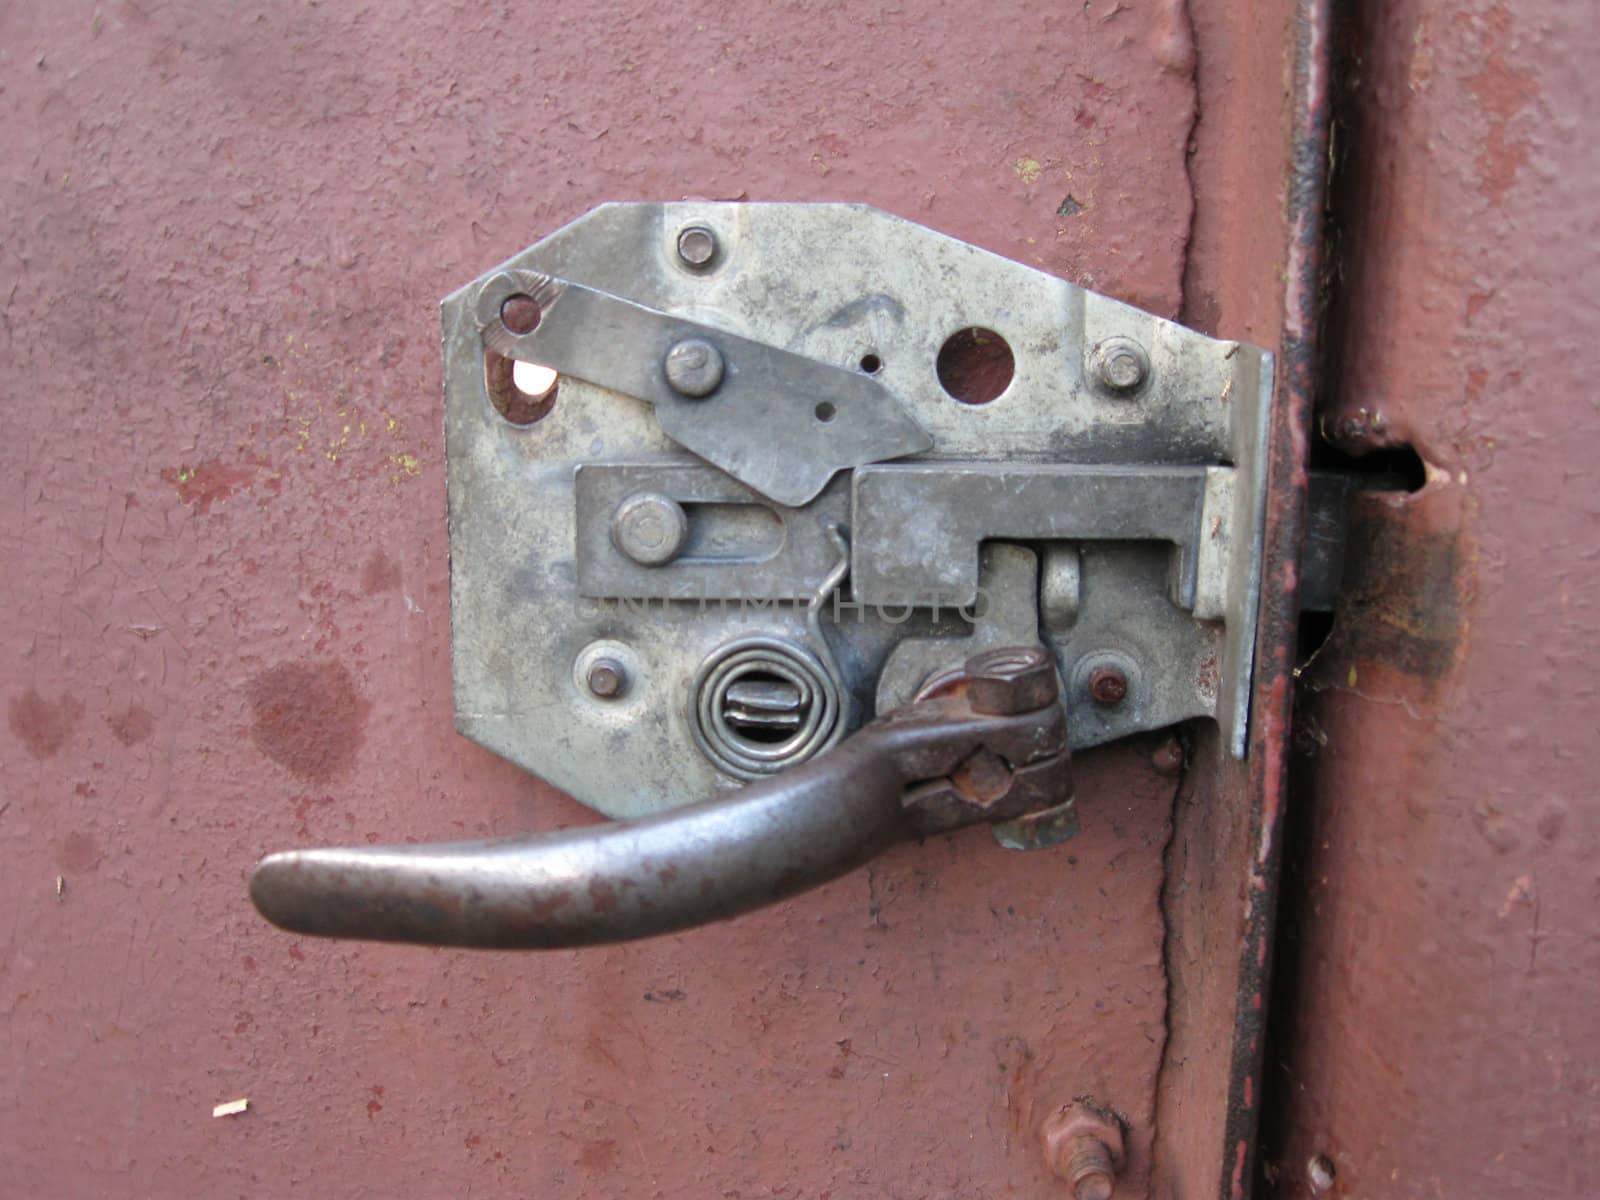 The lock for a gate